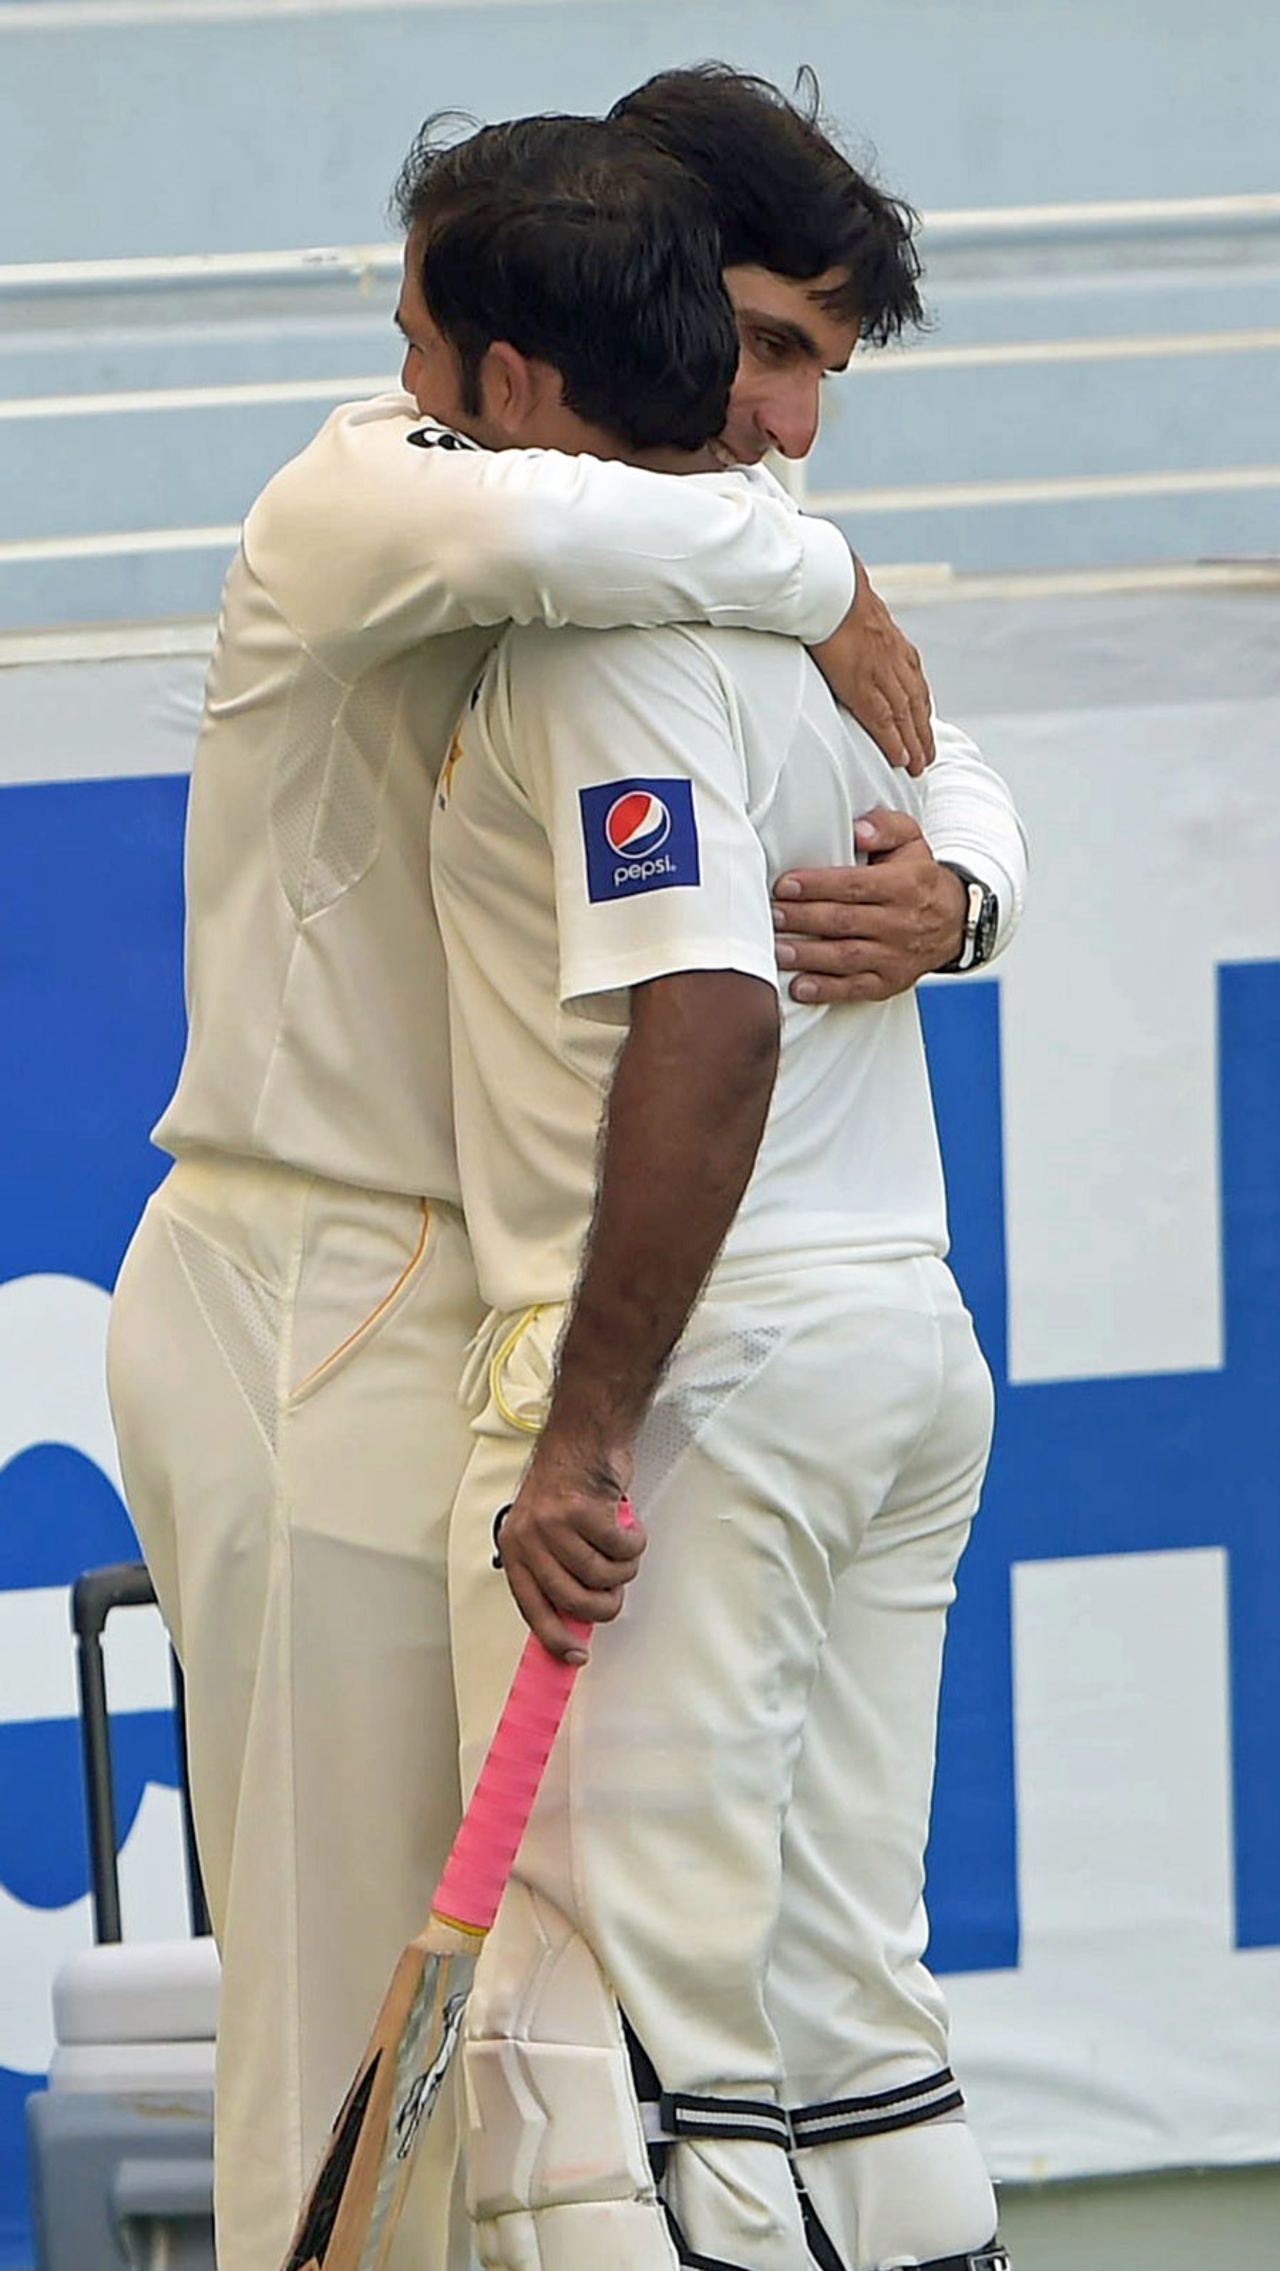 Misbah-ul-Haq embraces Sarfraz Ahmed after he was dismissed for 112, Pakistan v New Zealand, 2nd Test, Dubai, 4th day, November 20, 2014